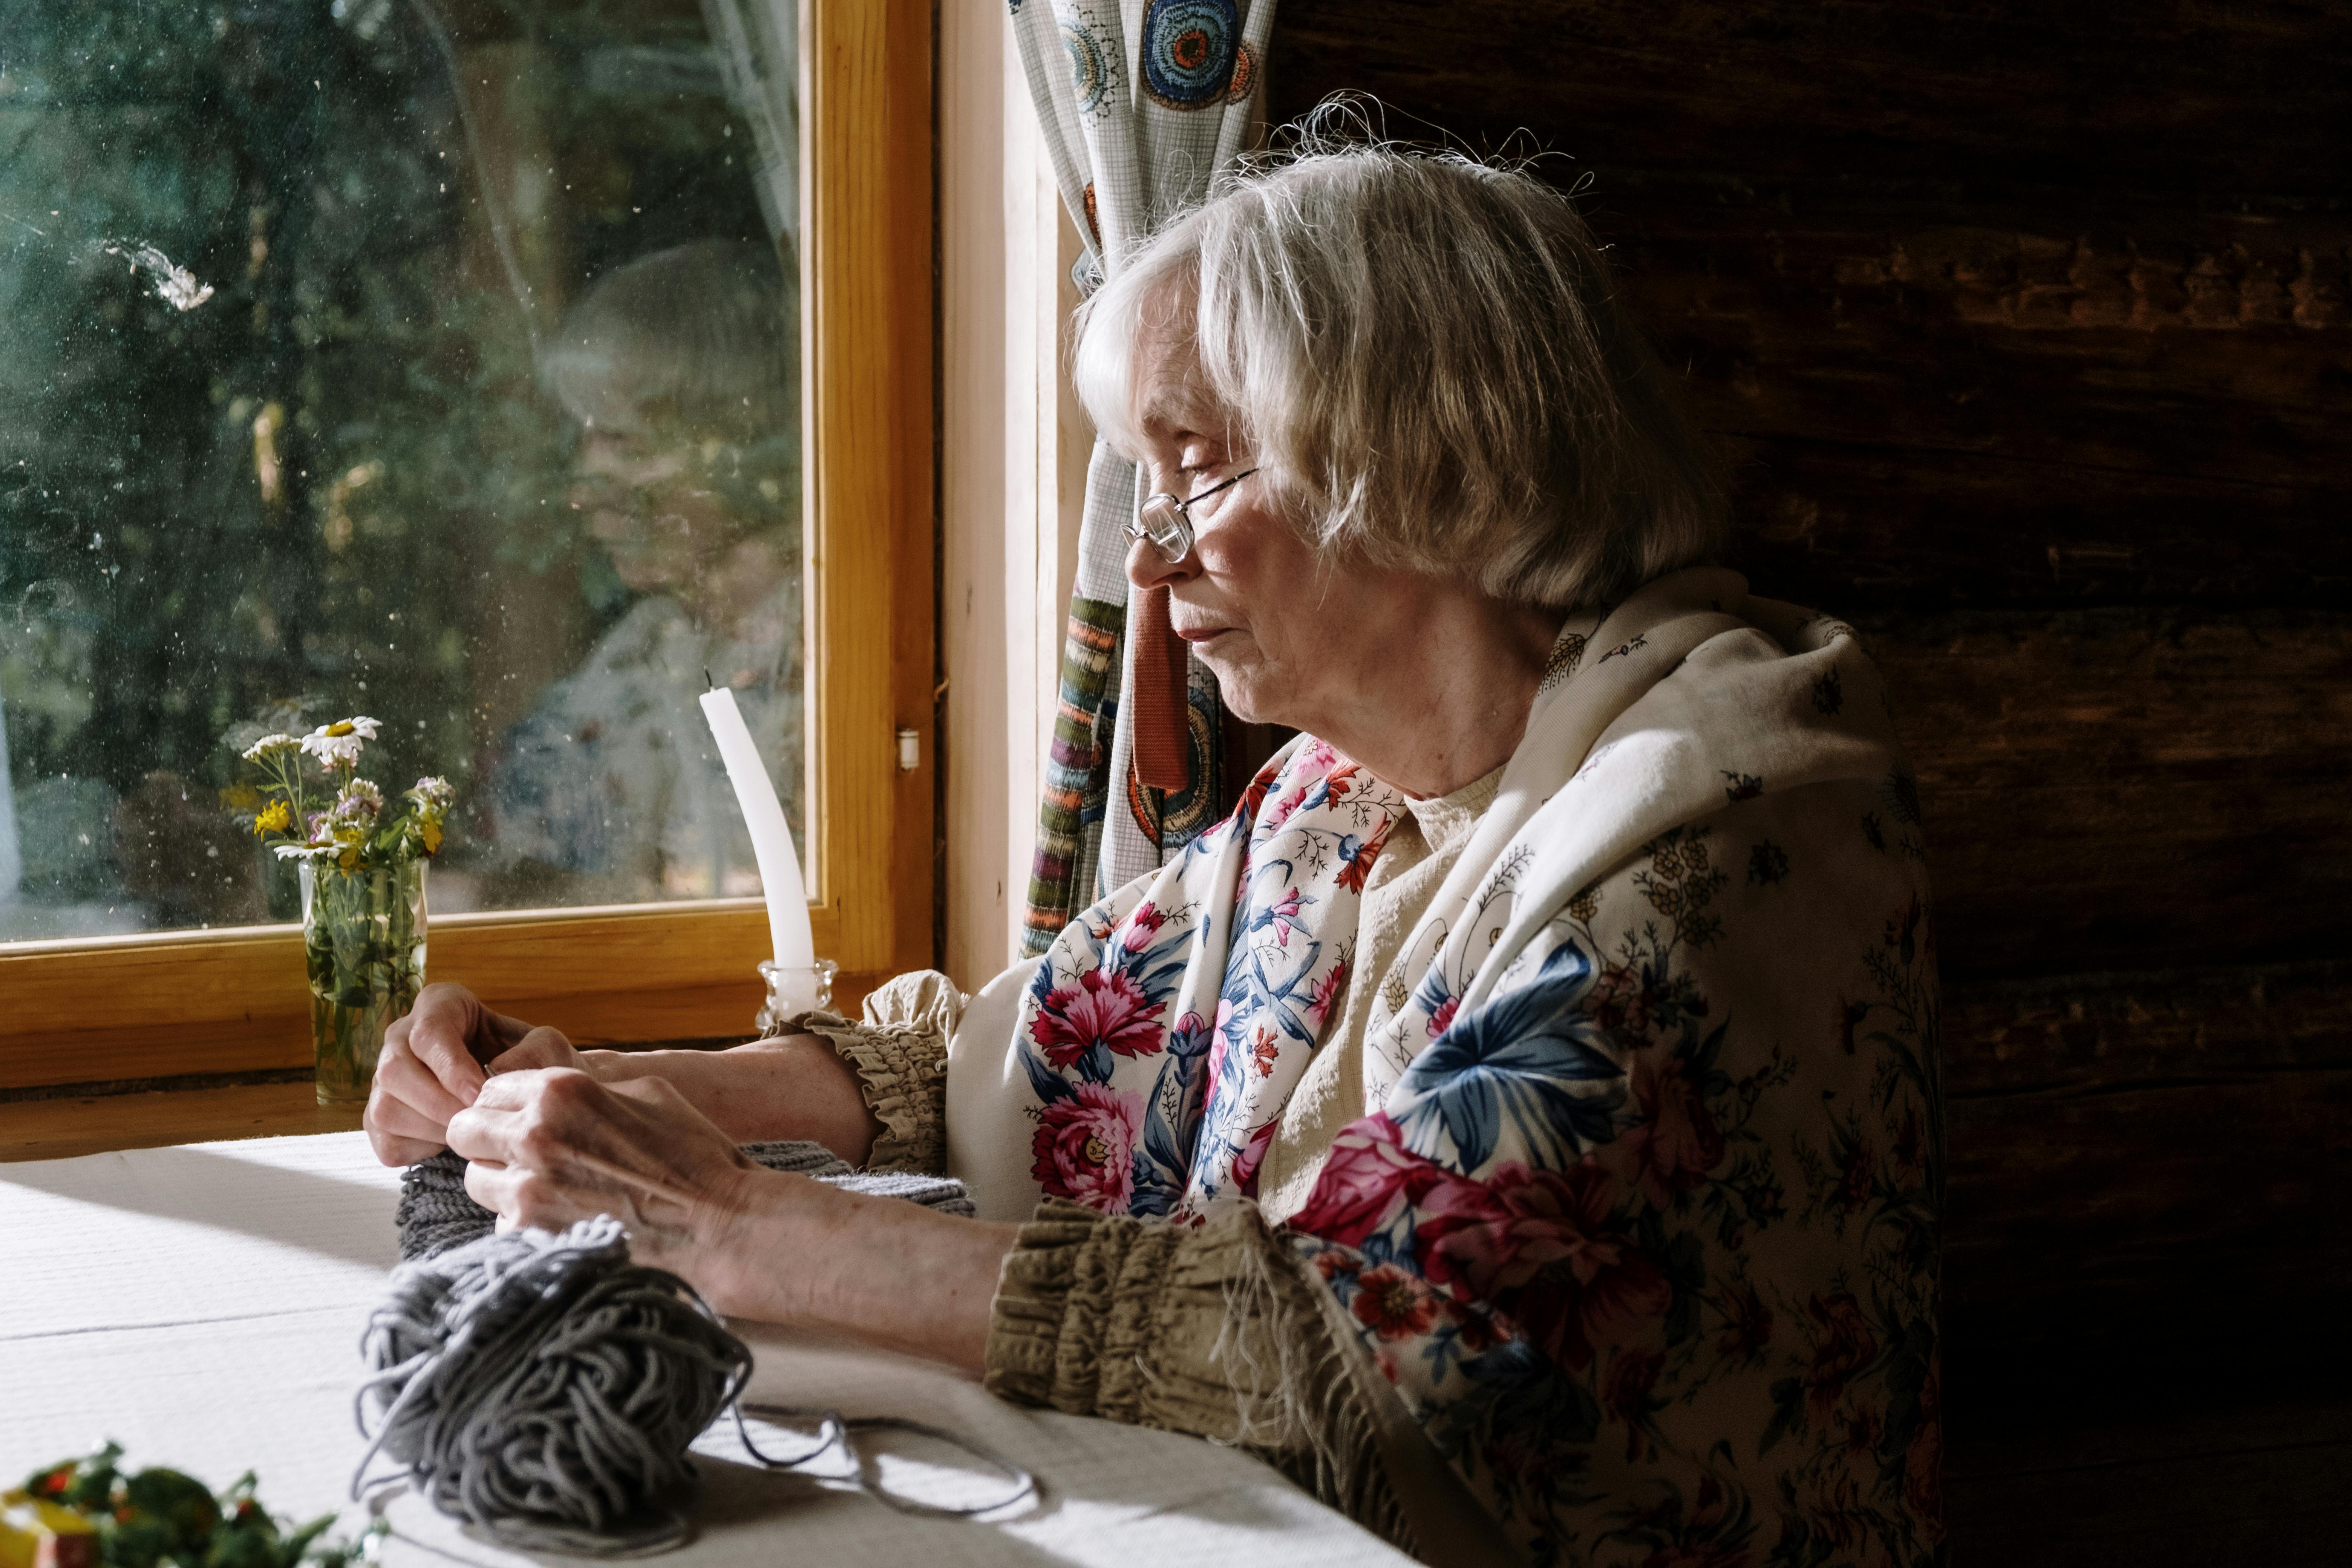 Gran knitting by the window, proud and content | Source: Pexels